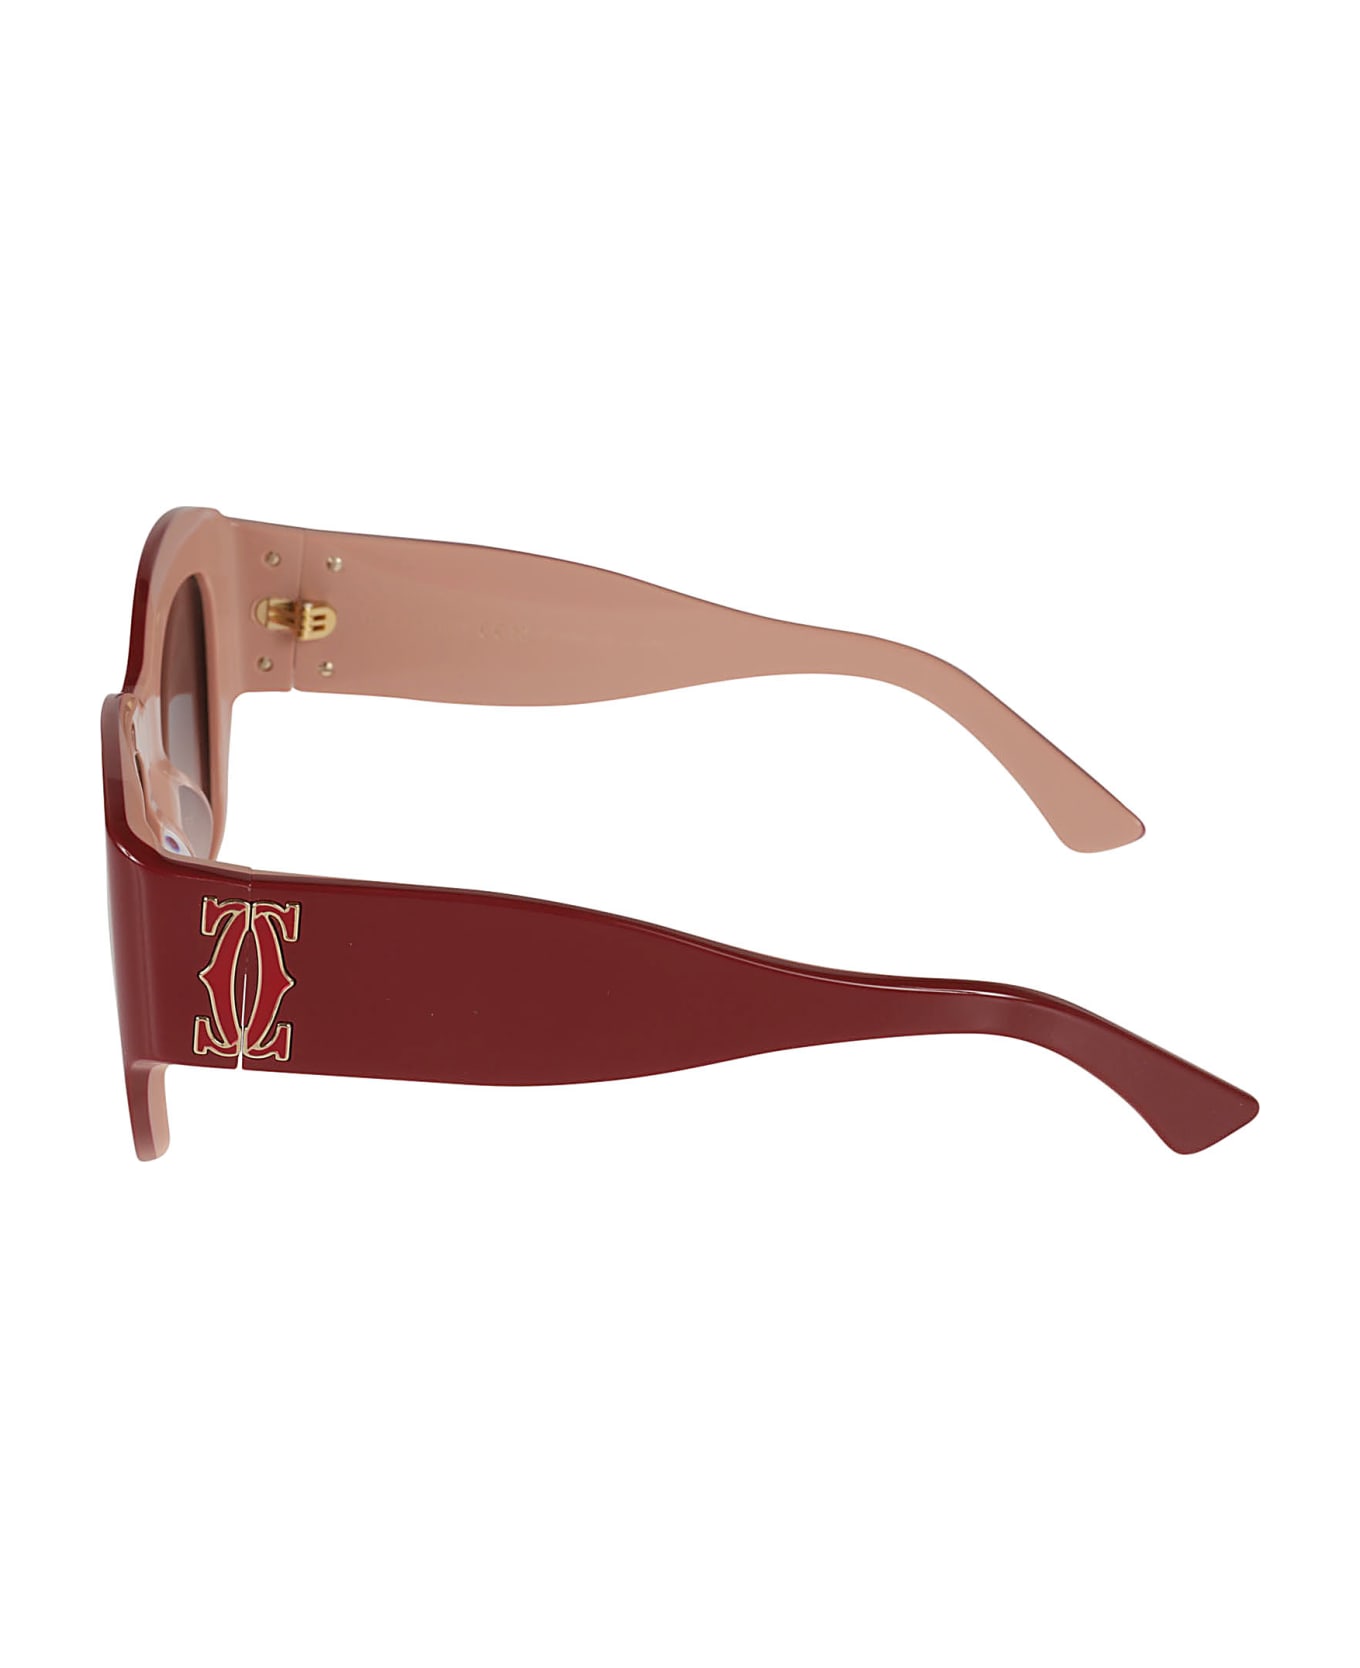 Cartier Eyewear Curved Square Sunglasses - Burgundy Red